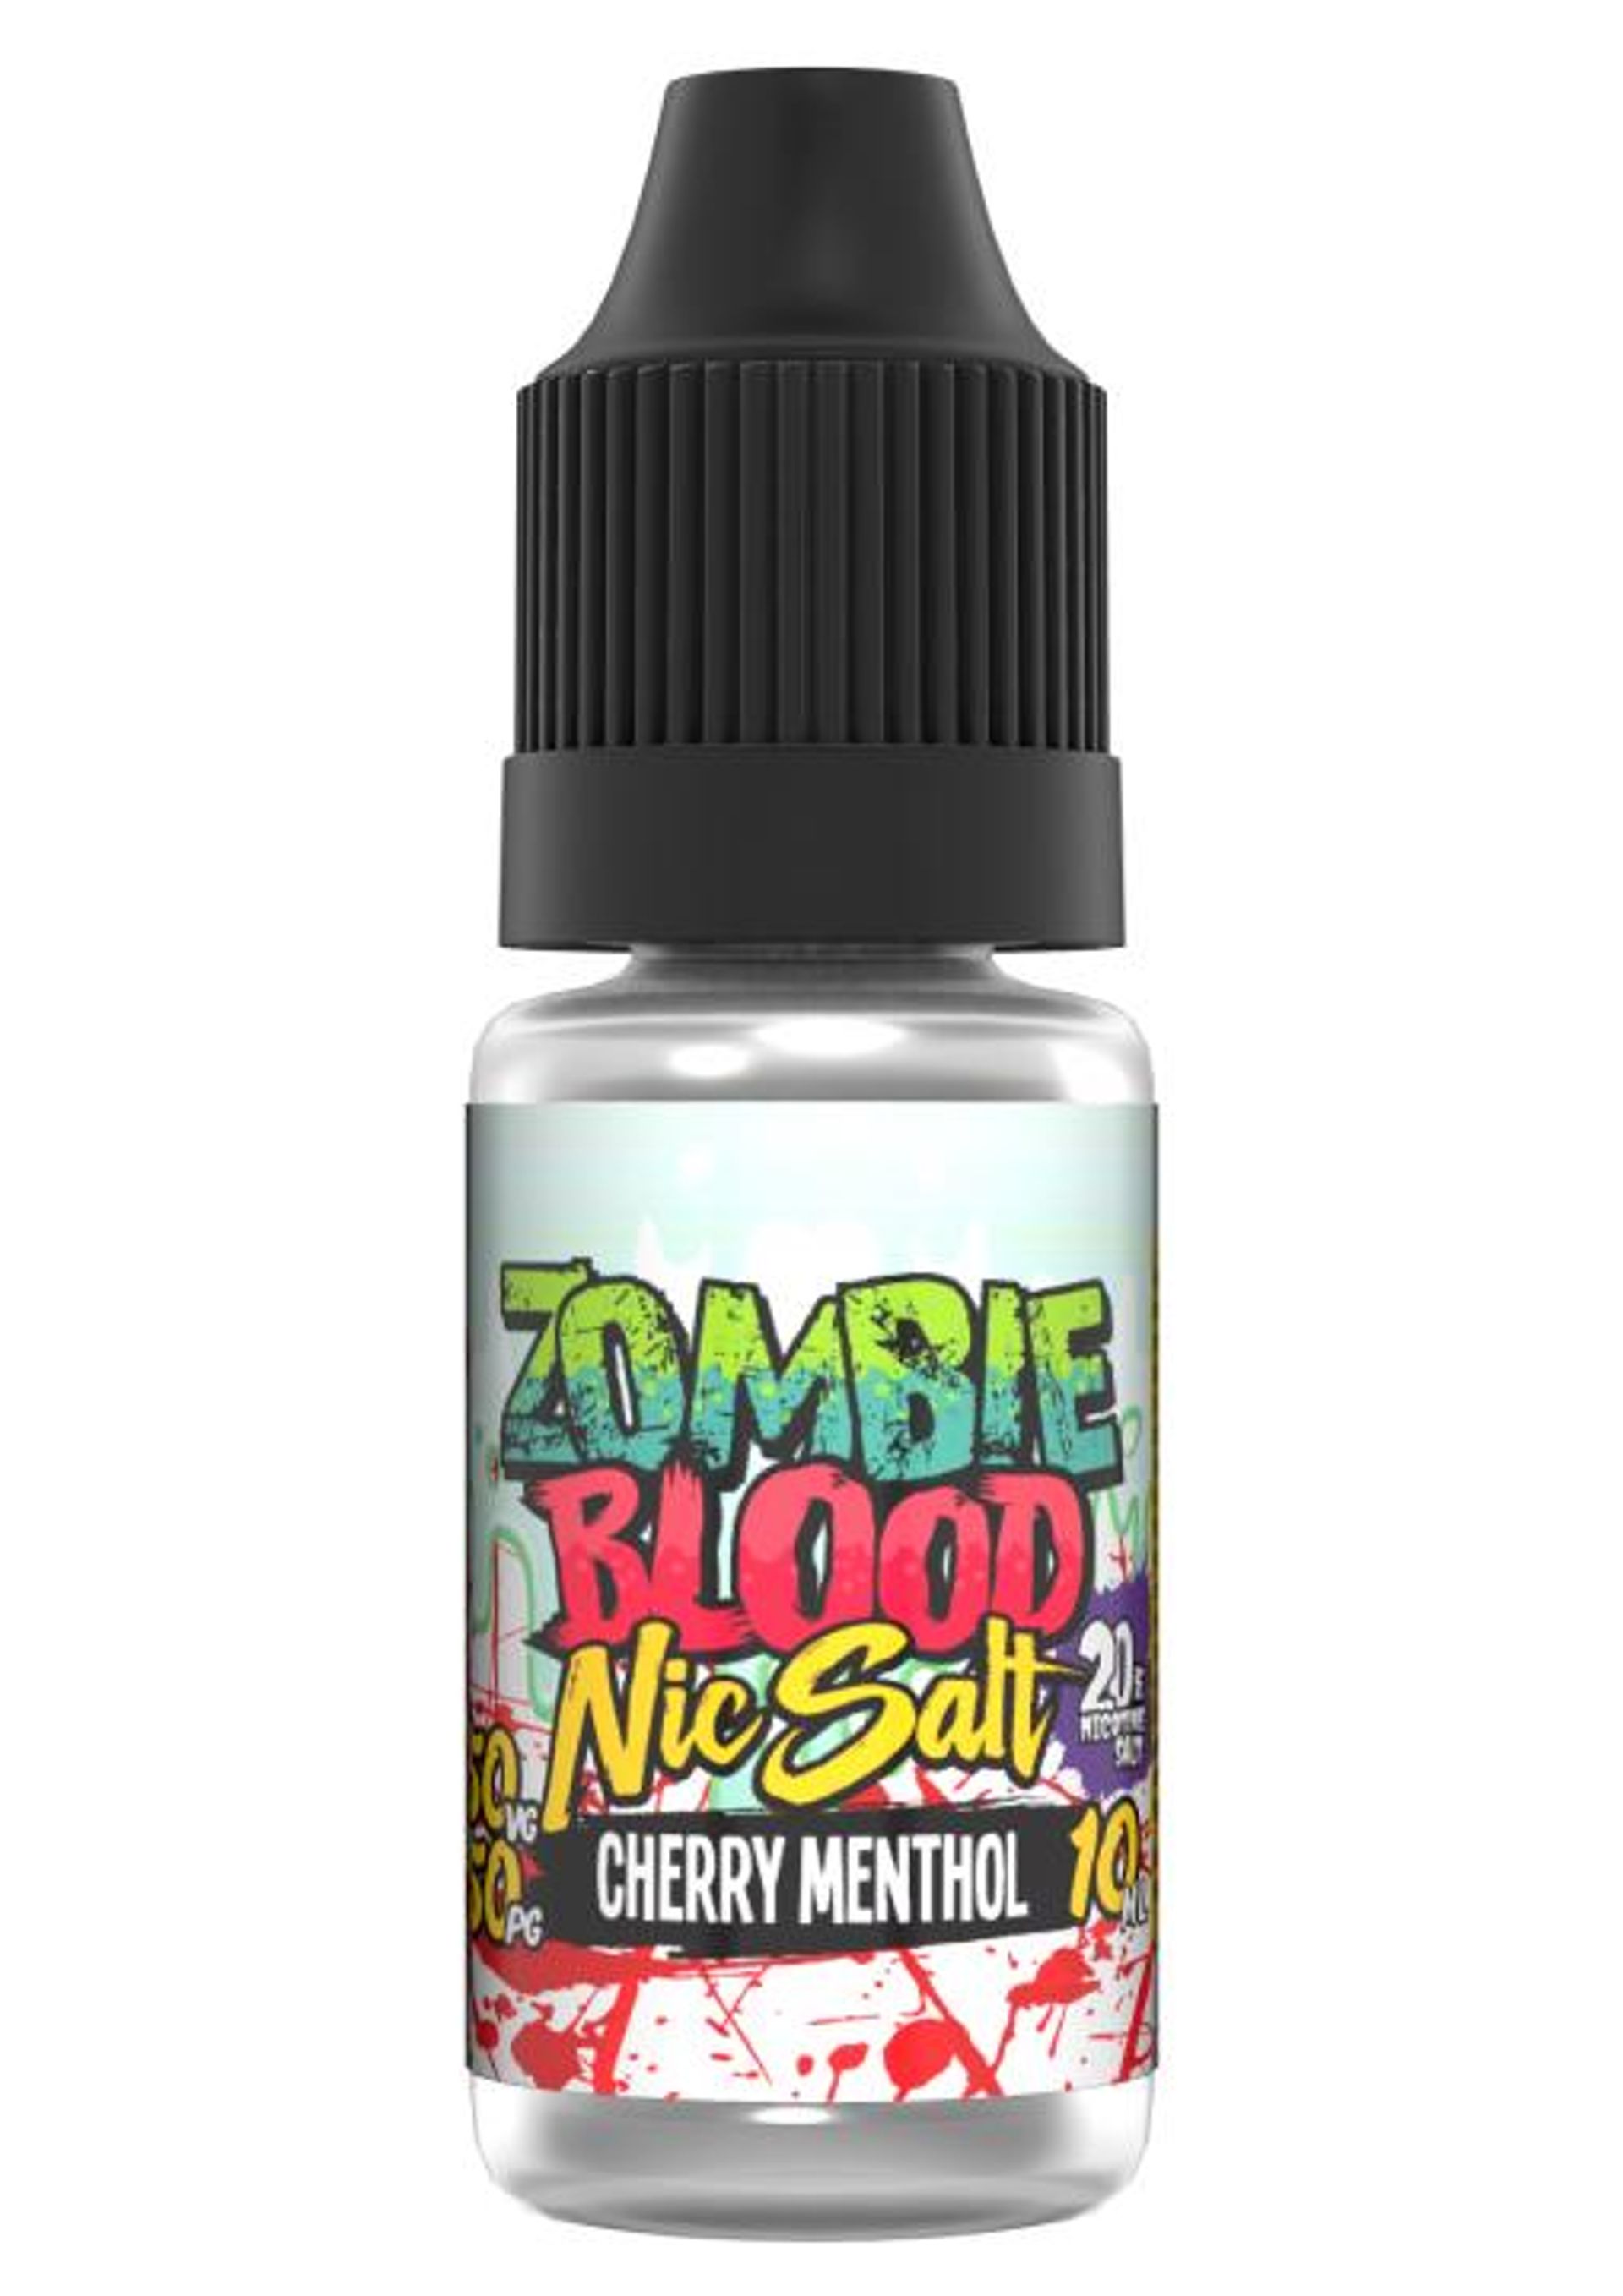 Image of Cherry Menthol by Zombie Blood